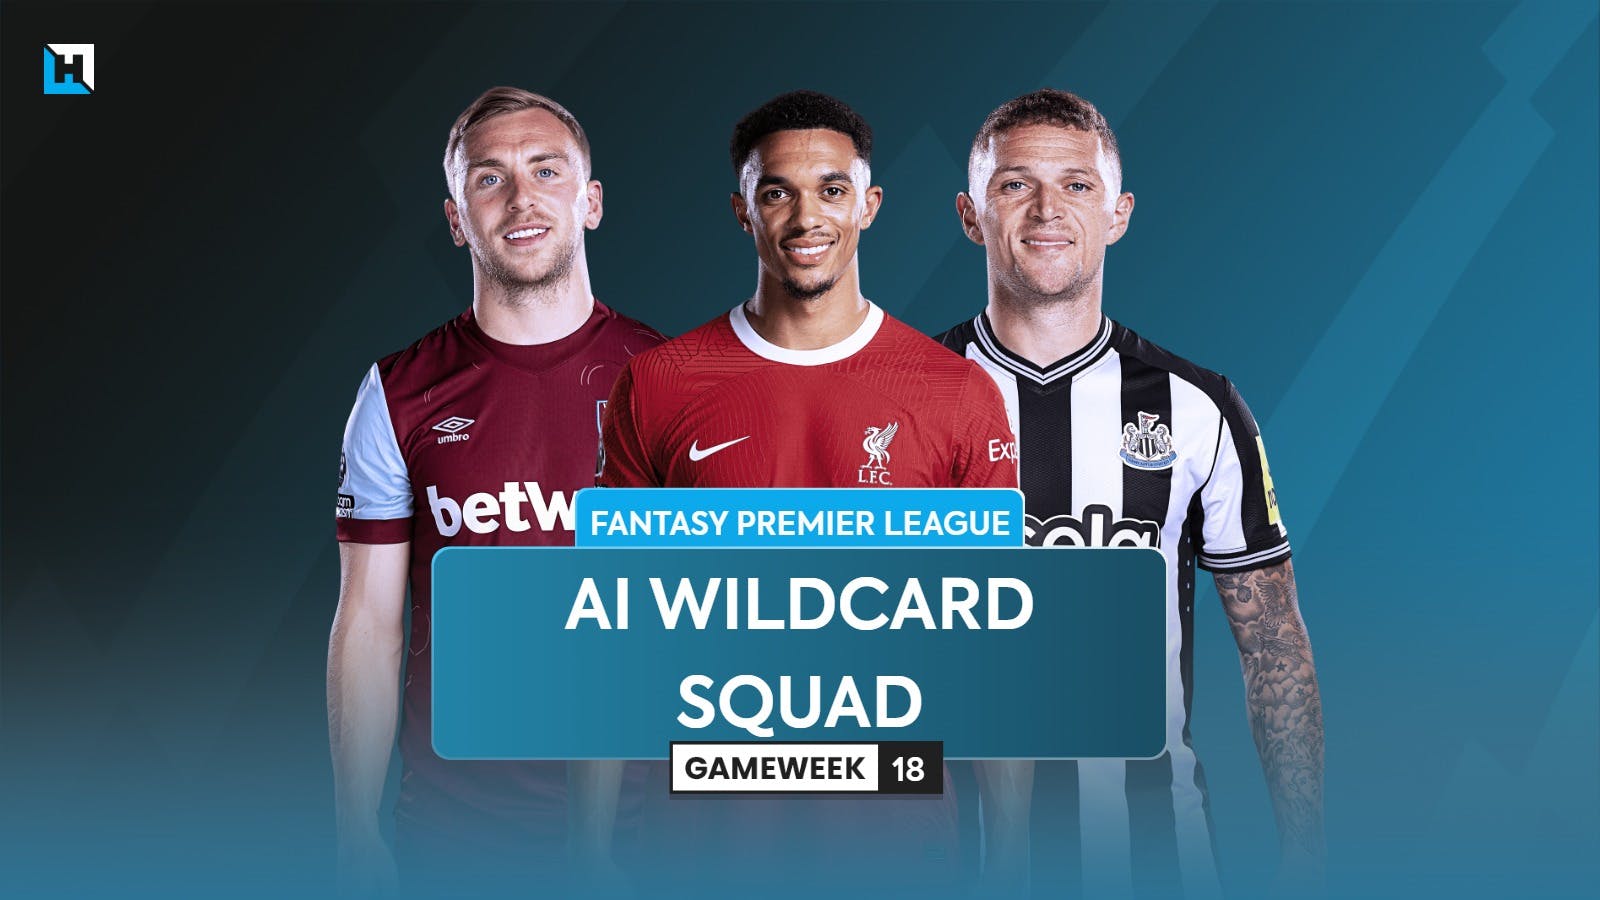 The best FPL Wildcard team for Gameweek 18 according to AI